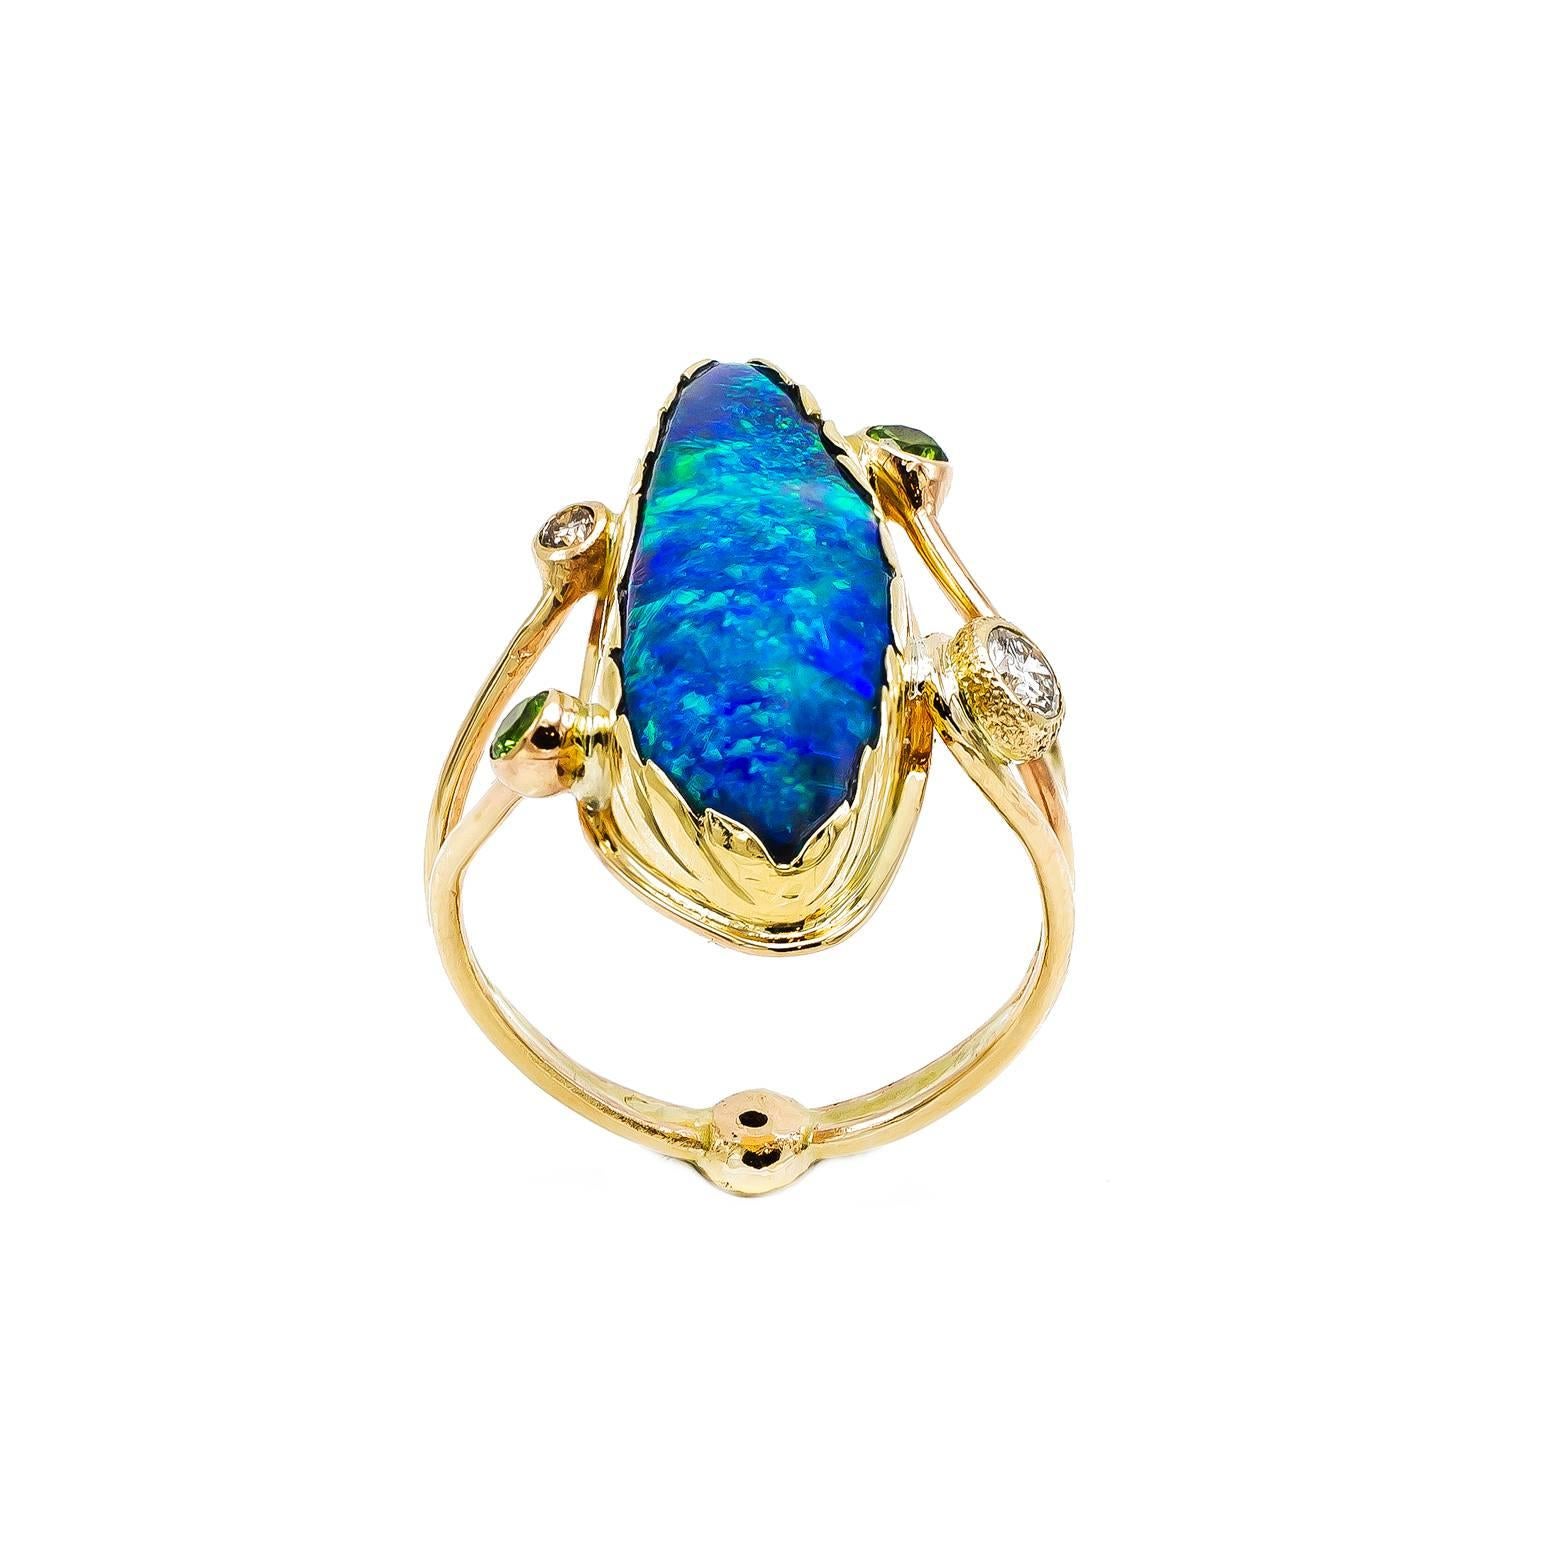 Women's Large Boulder Opal Ring with Green Garnets and White Sapphires Set in Gold